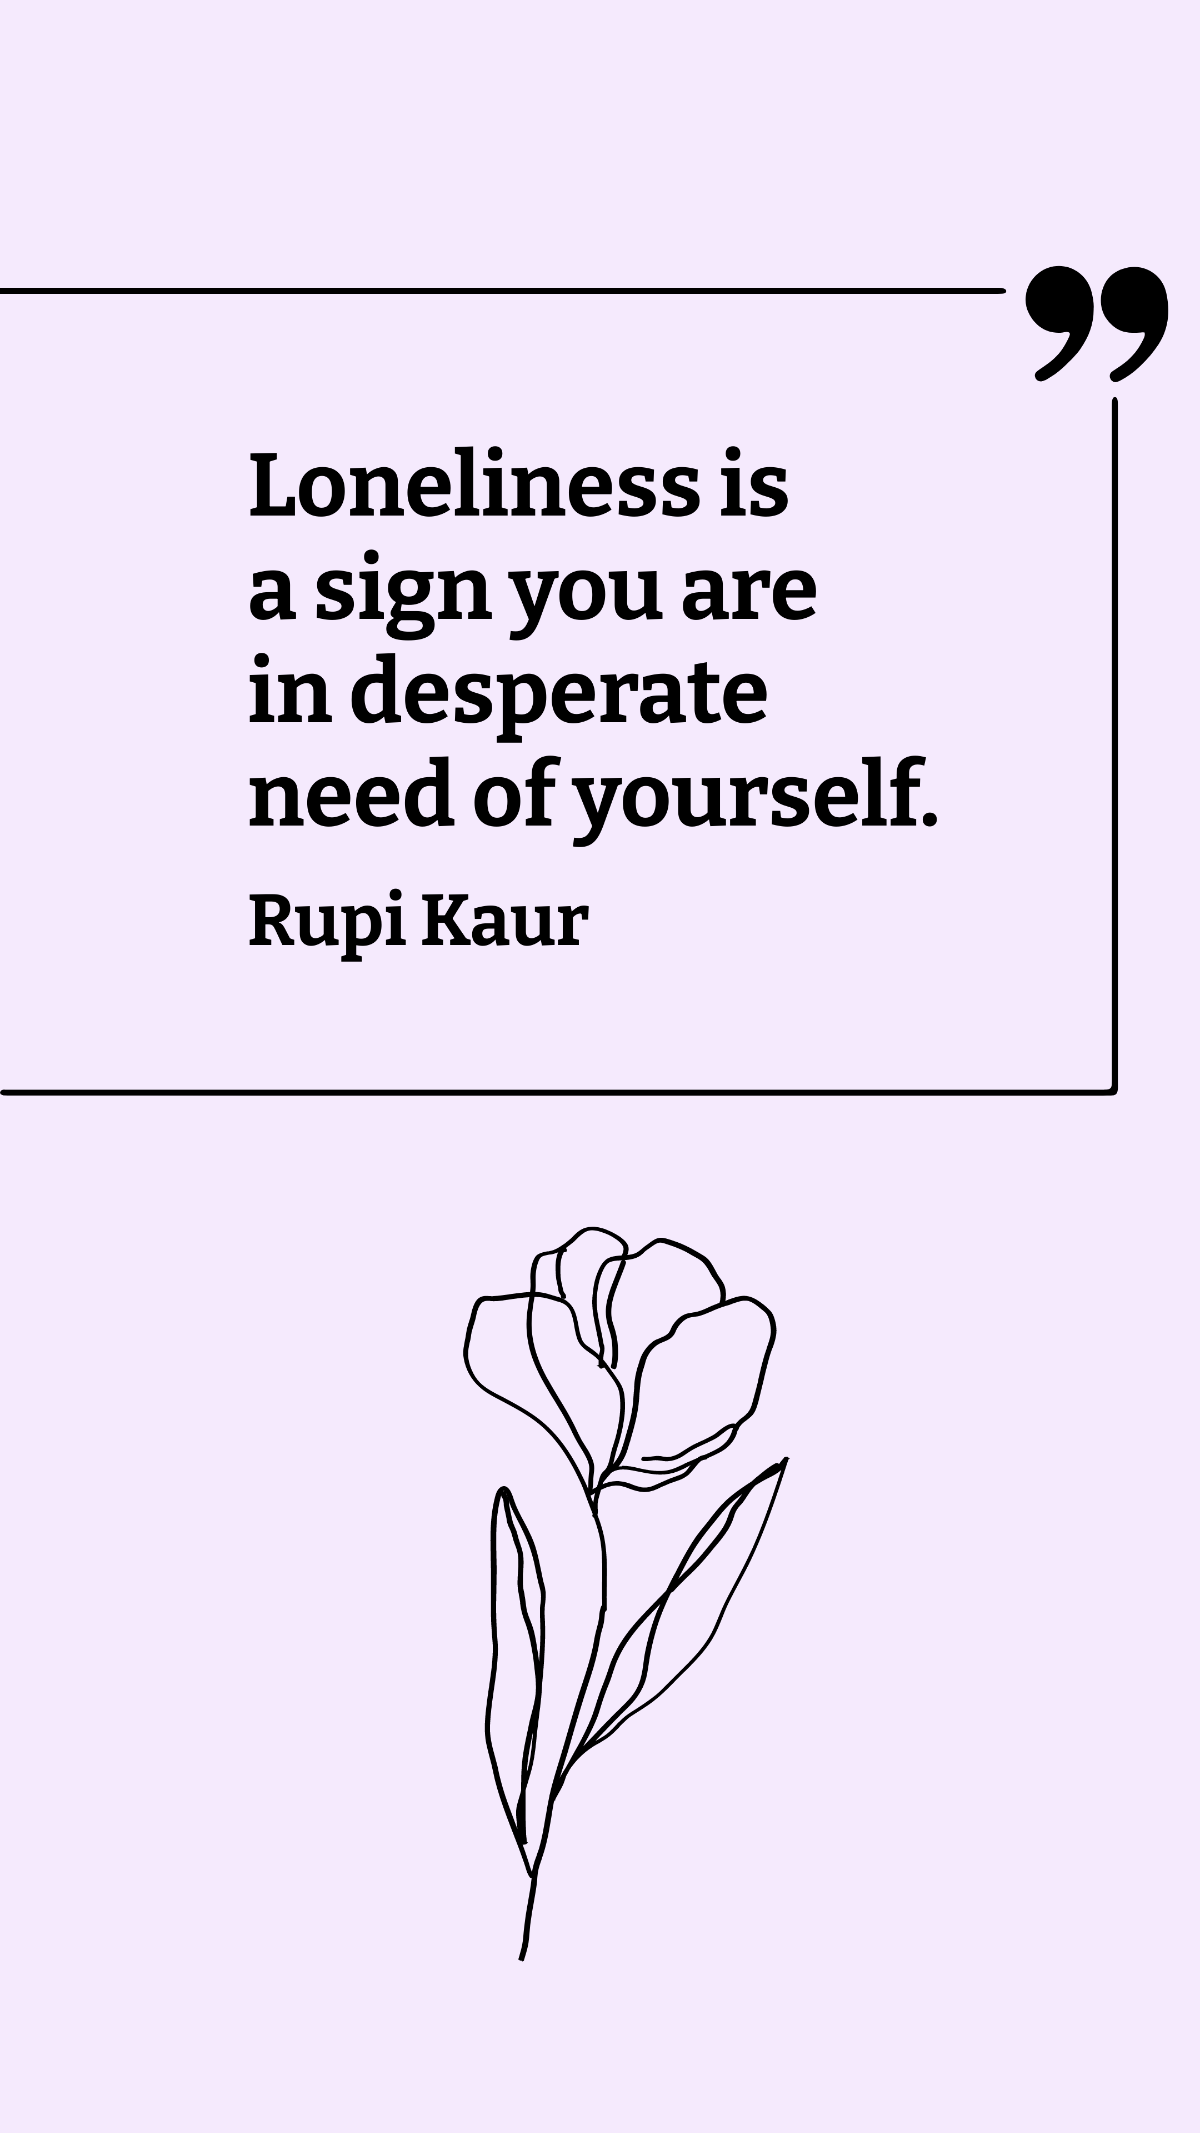 Free Rupi Kaur - Loneliness is a sign you are in desperate need of yourself. Template